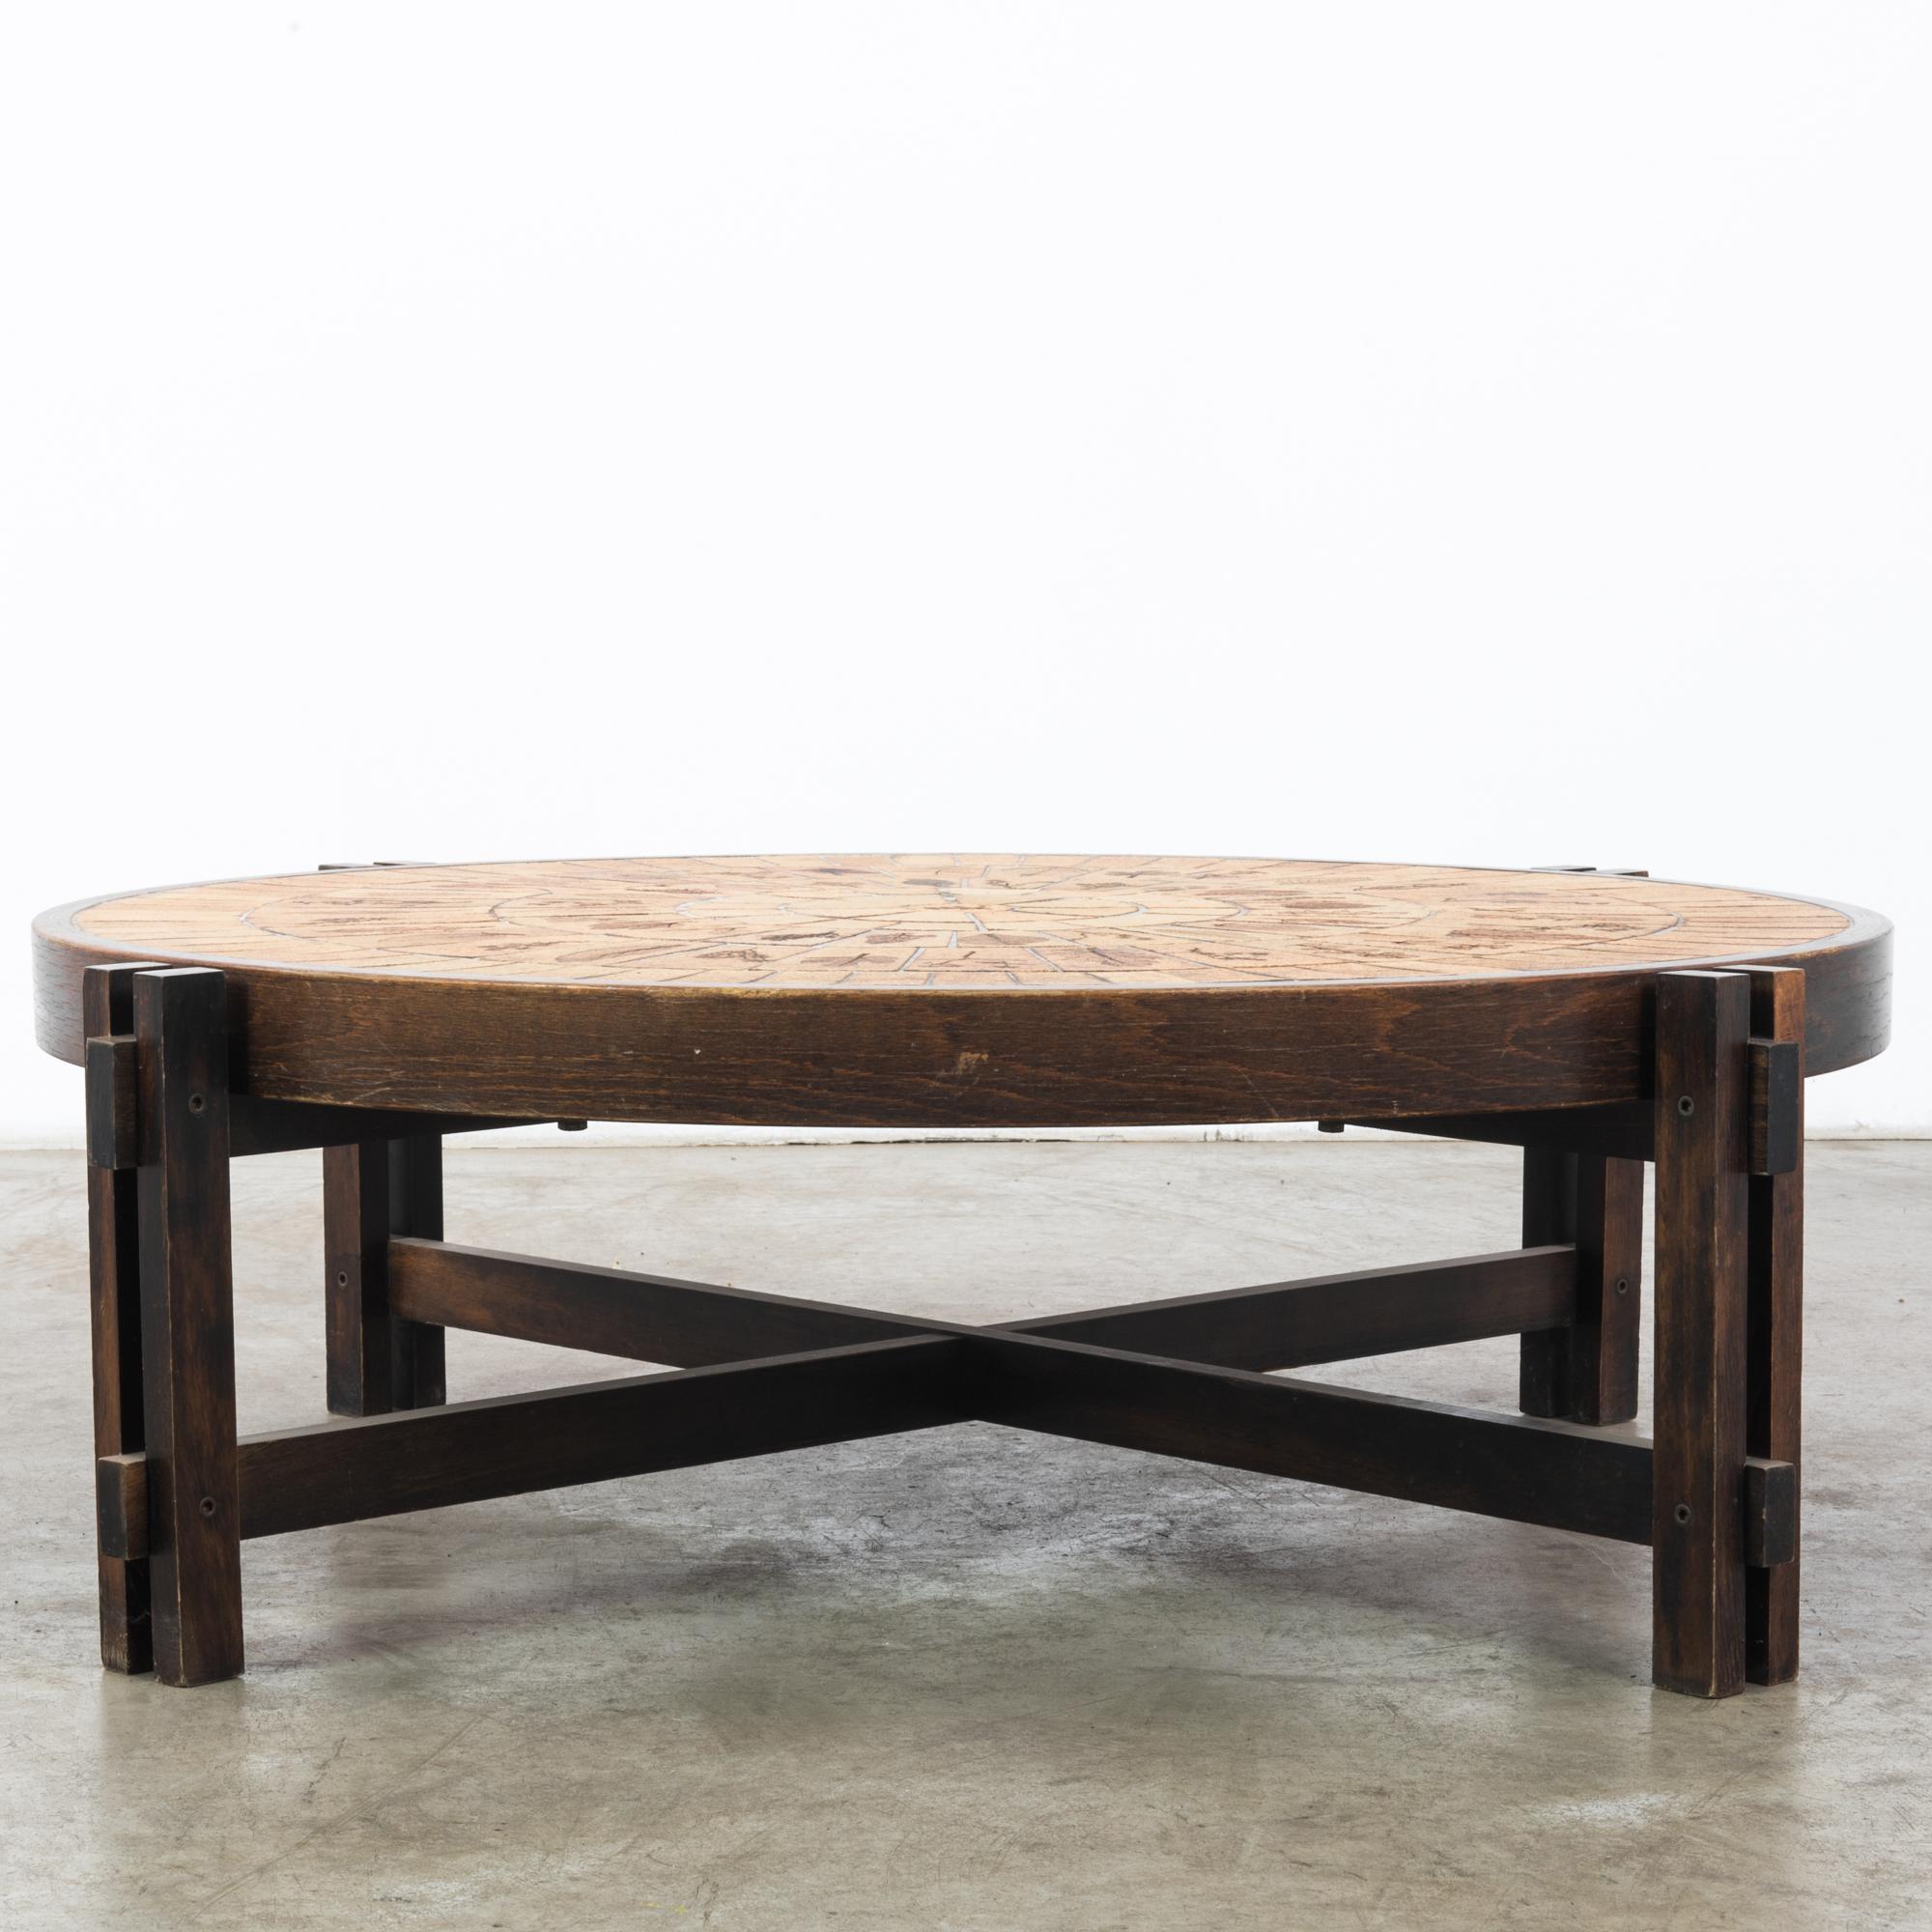 This wooden coffee table was made in France, circa 1950. It was designed by Roger Capron, an artist pivotal in the renaissance of the pottery industry in Vallauris, southeastern France. The circular ceramic top supported on four solid posts features